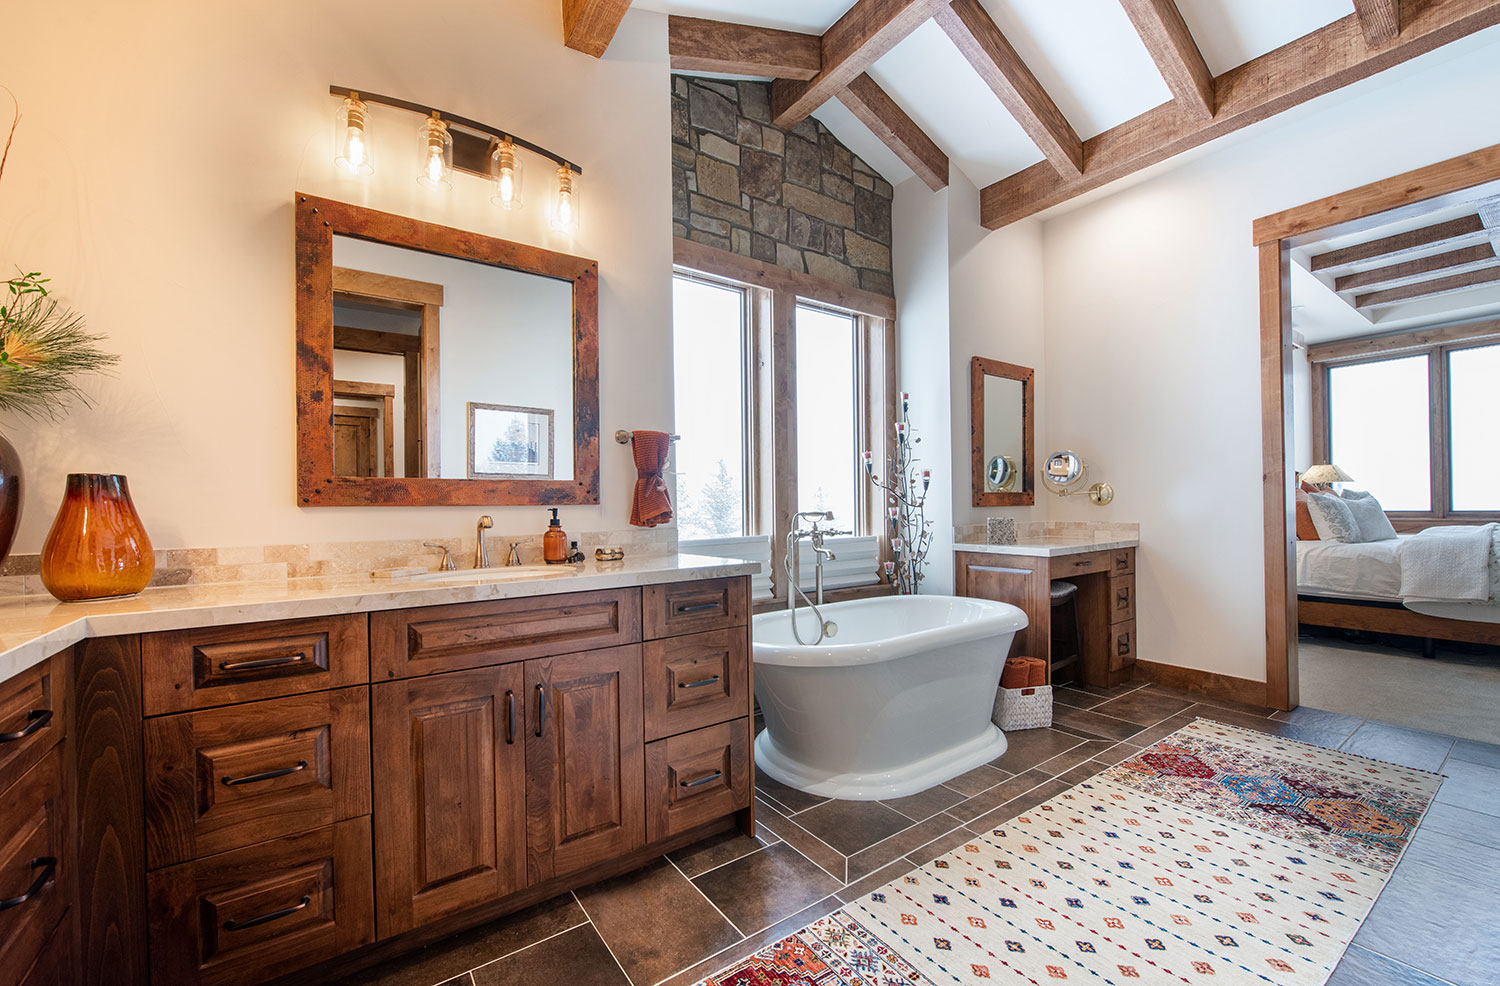 https://carusokitchens.com/wp-content/uploads/2022/10/Top-Reasons-to-Invest-in-a-Bathroom-Remodel.jpg